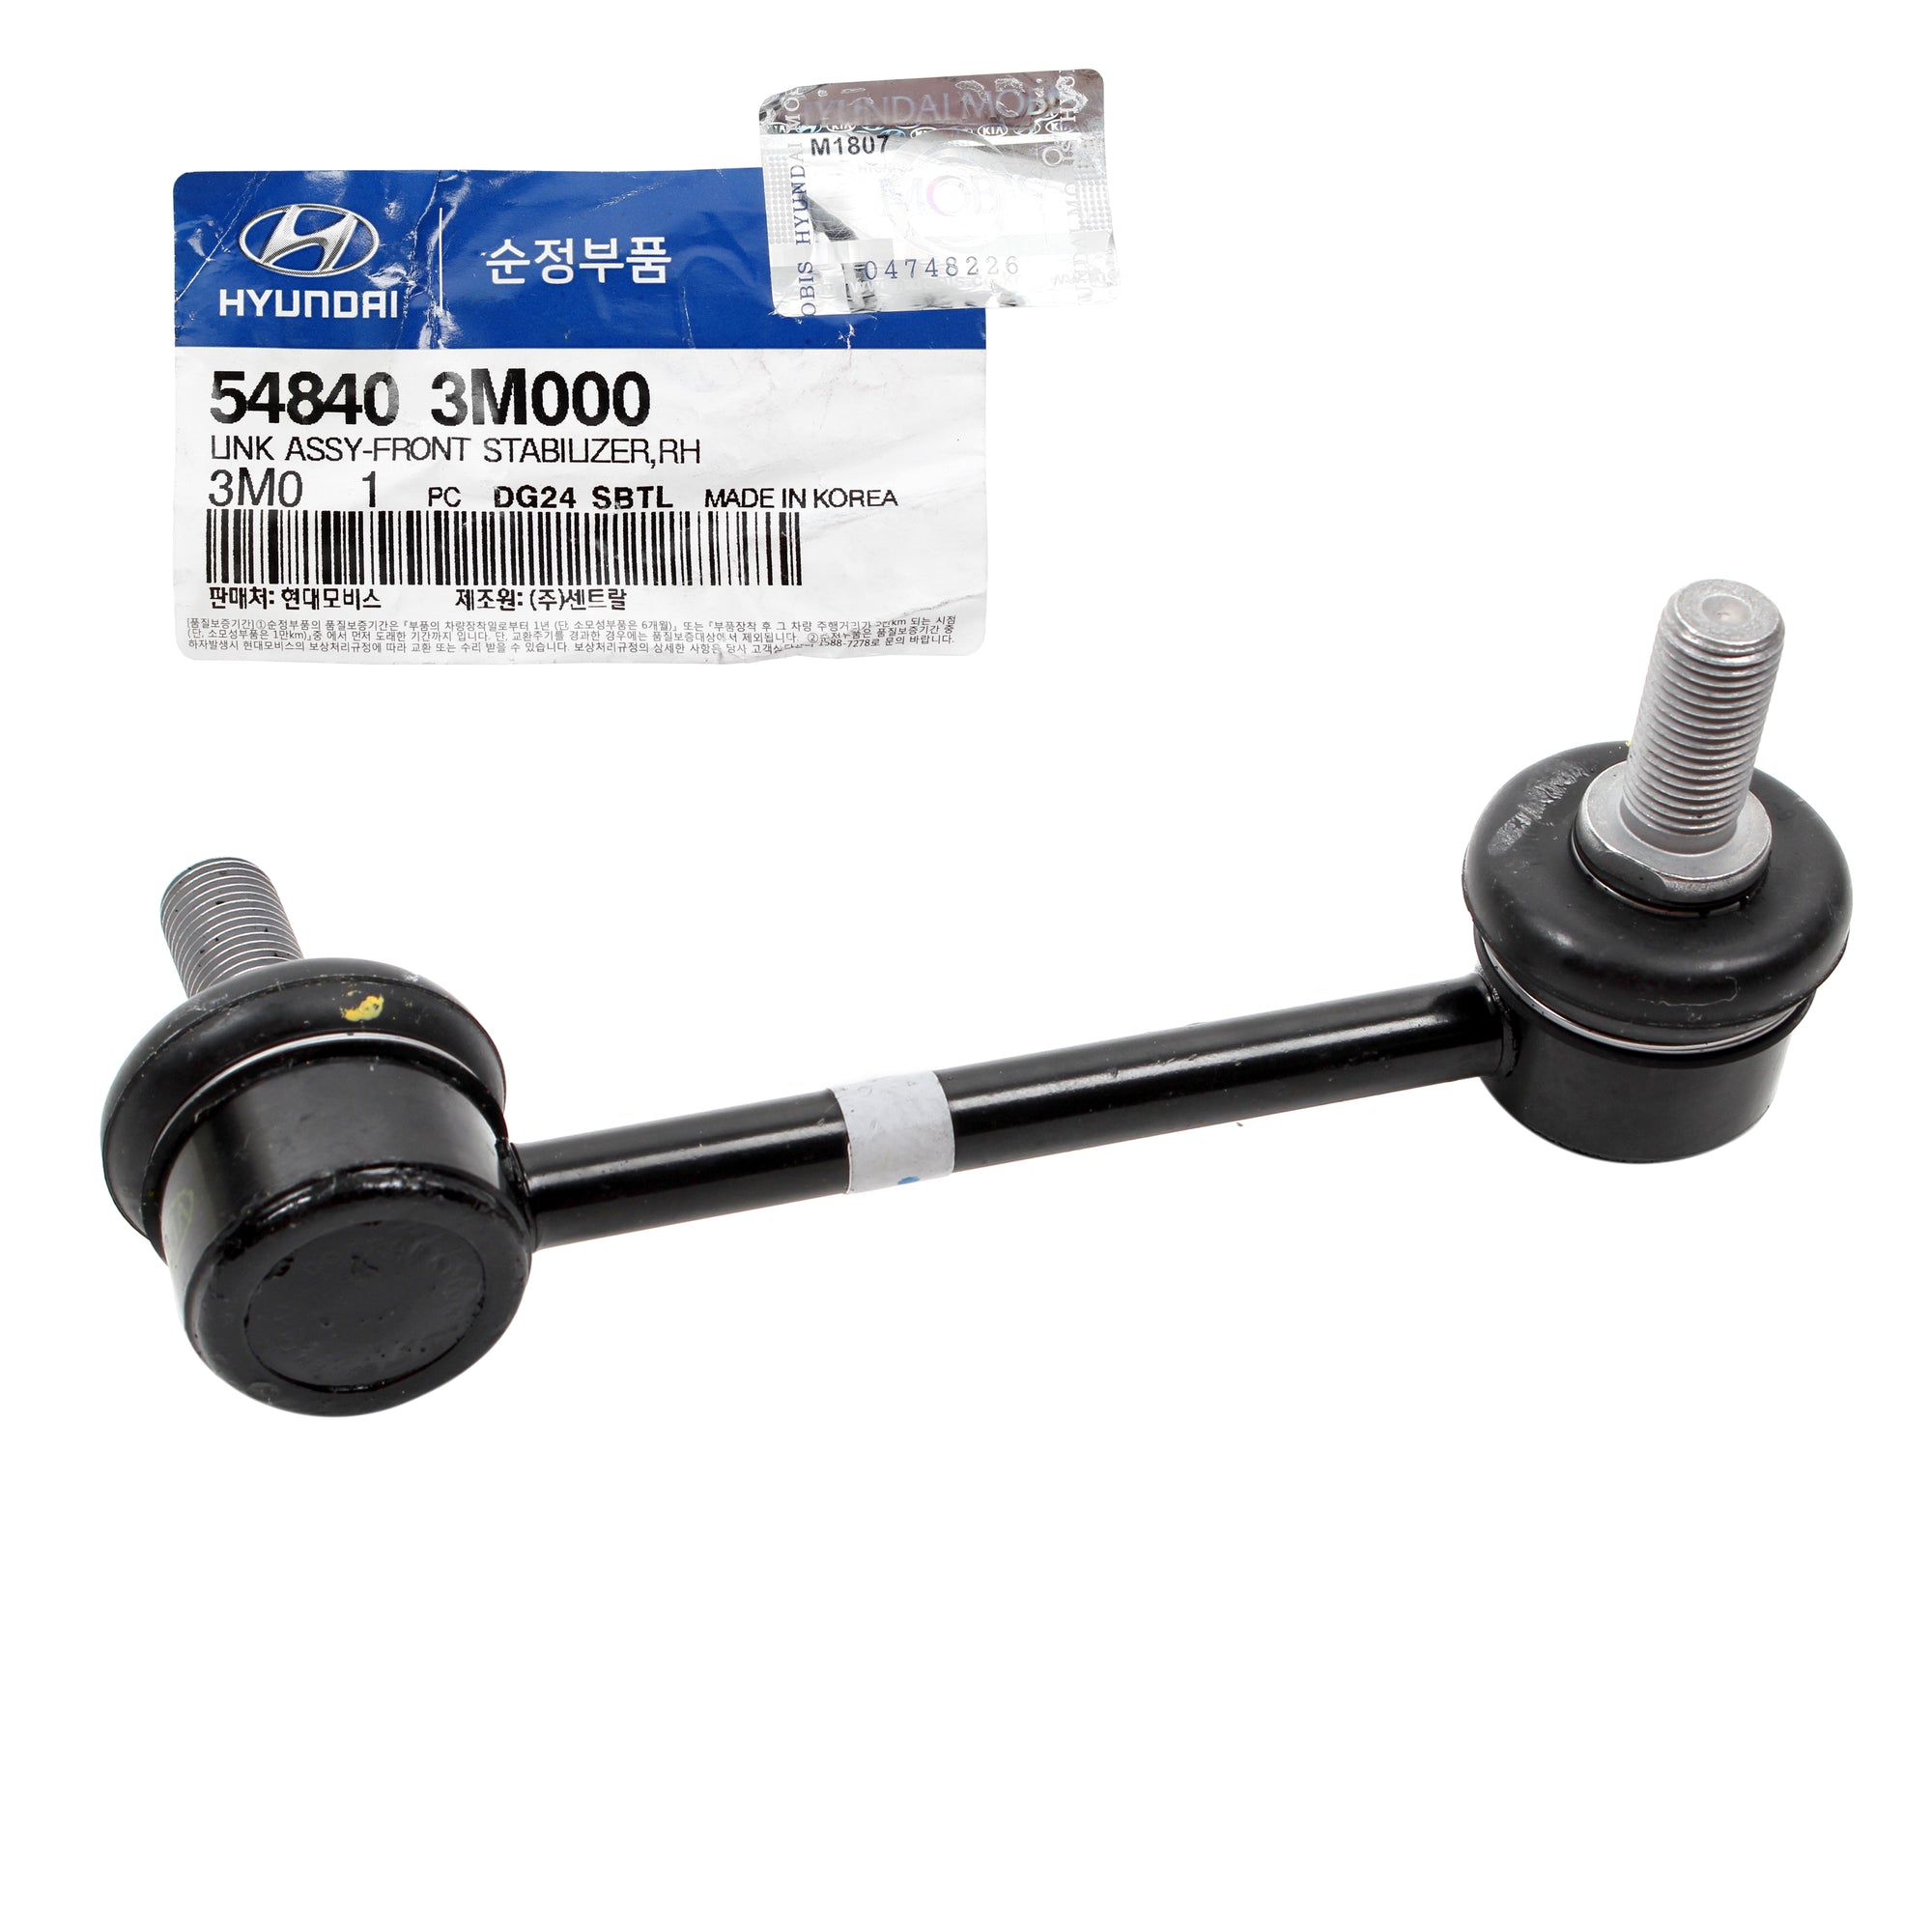 GENUINE Stabilizer Bar Link FRONT RIGHT for 09-14 Equus Genesis 548403M000